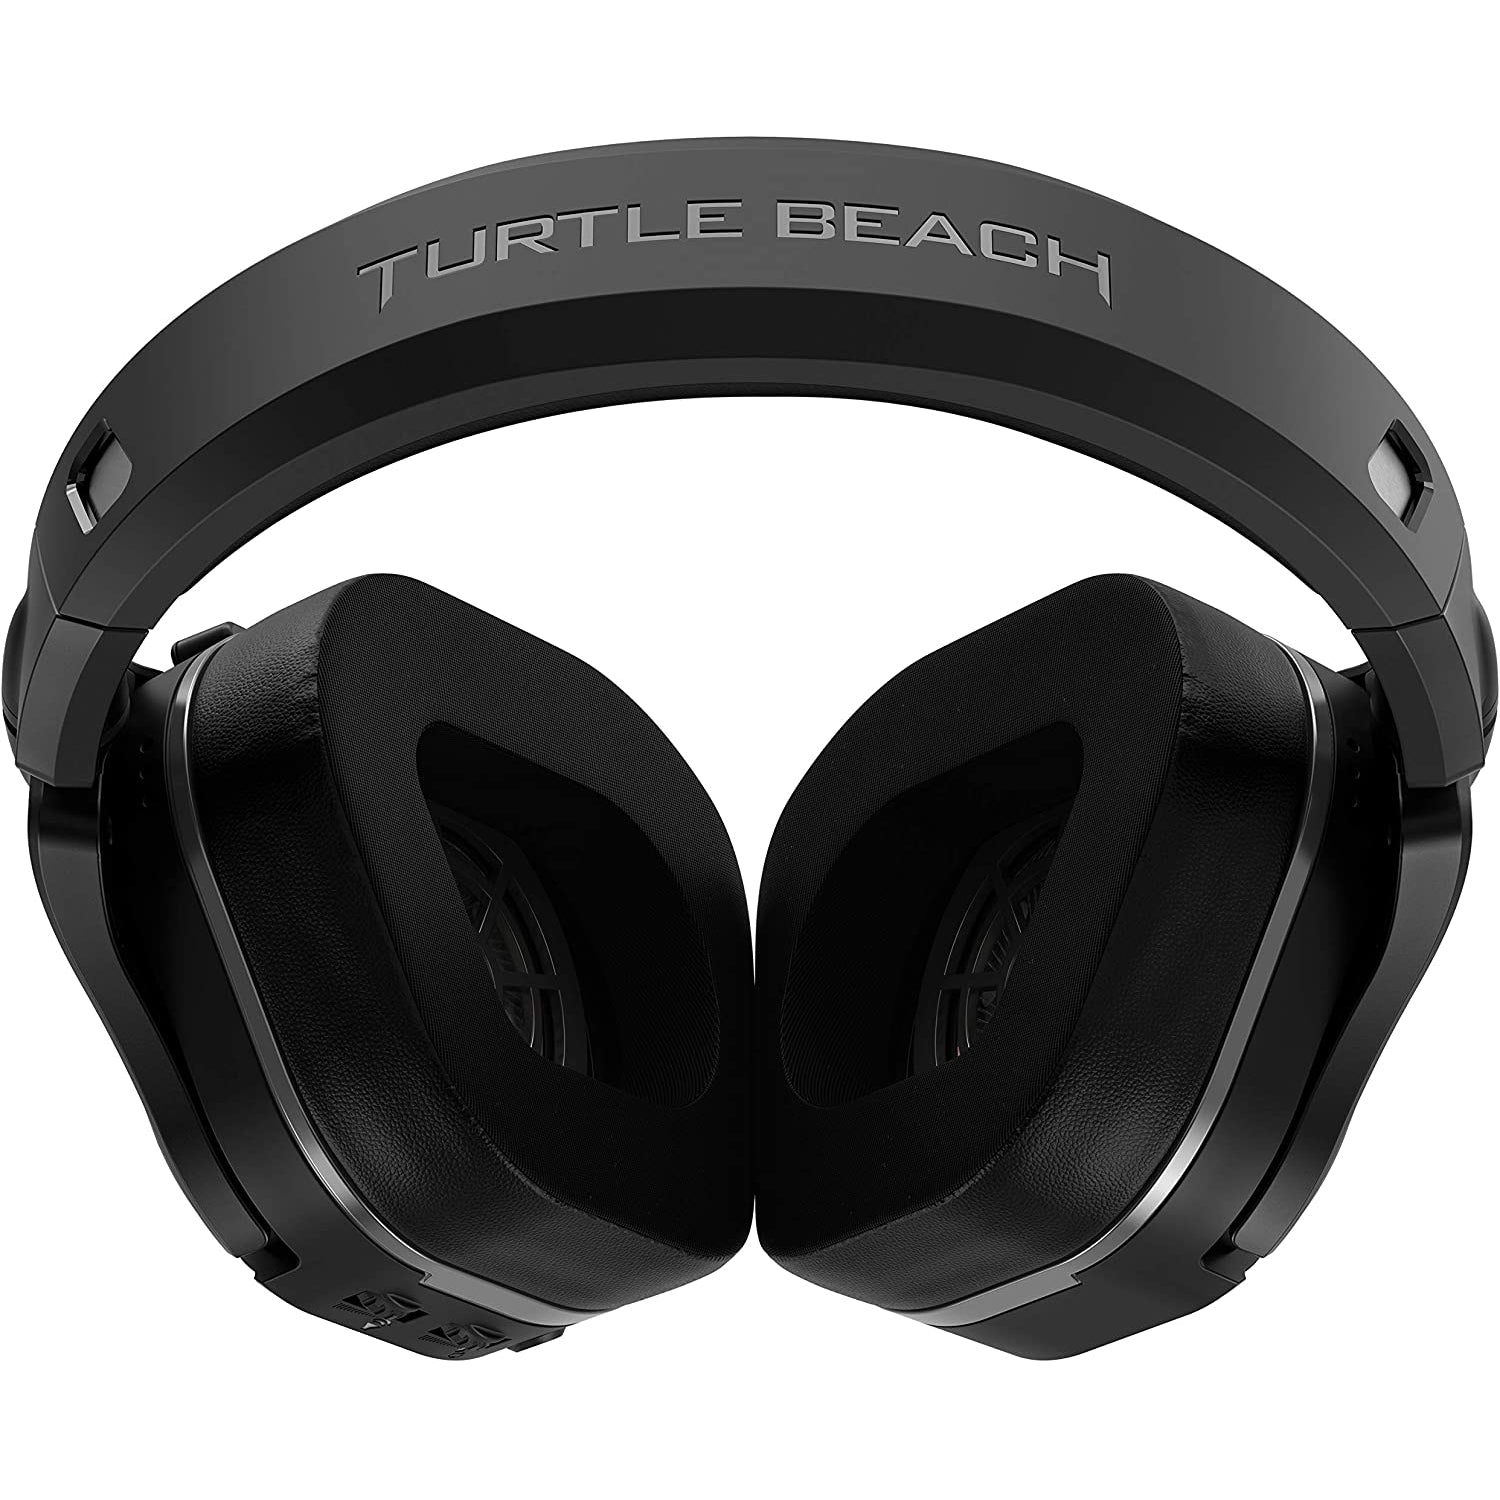 Turtle Beach Stealth 700 Gen 2 Wireless Gaming Headset For Xbox / PlayStation